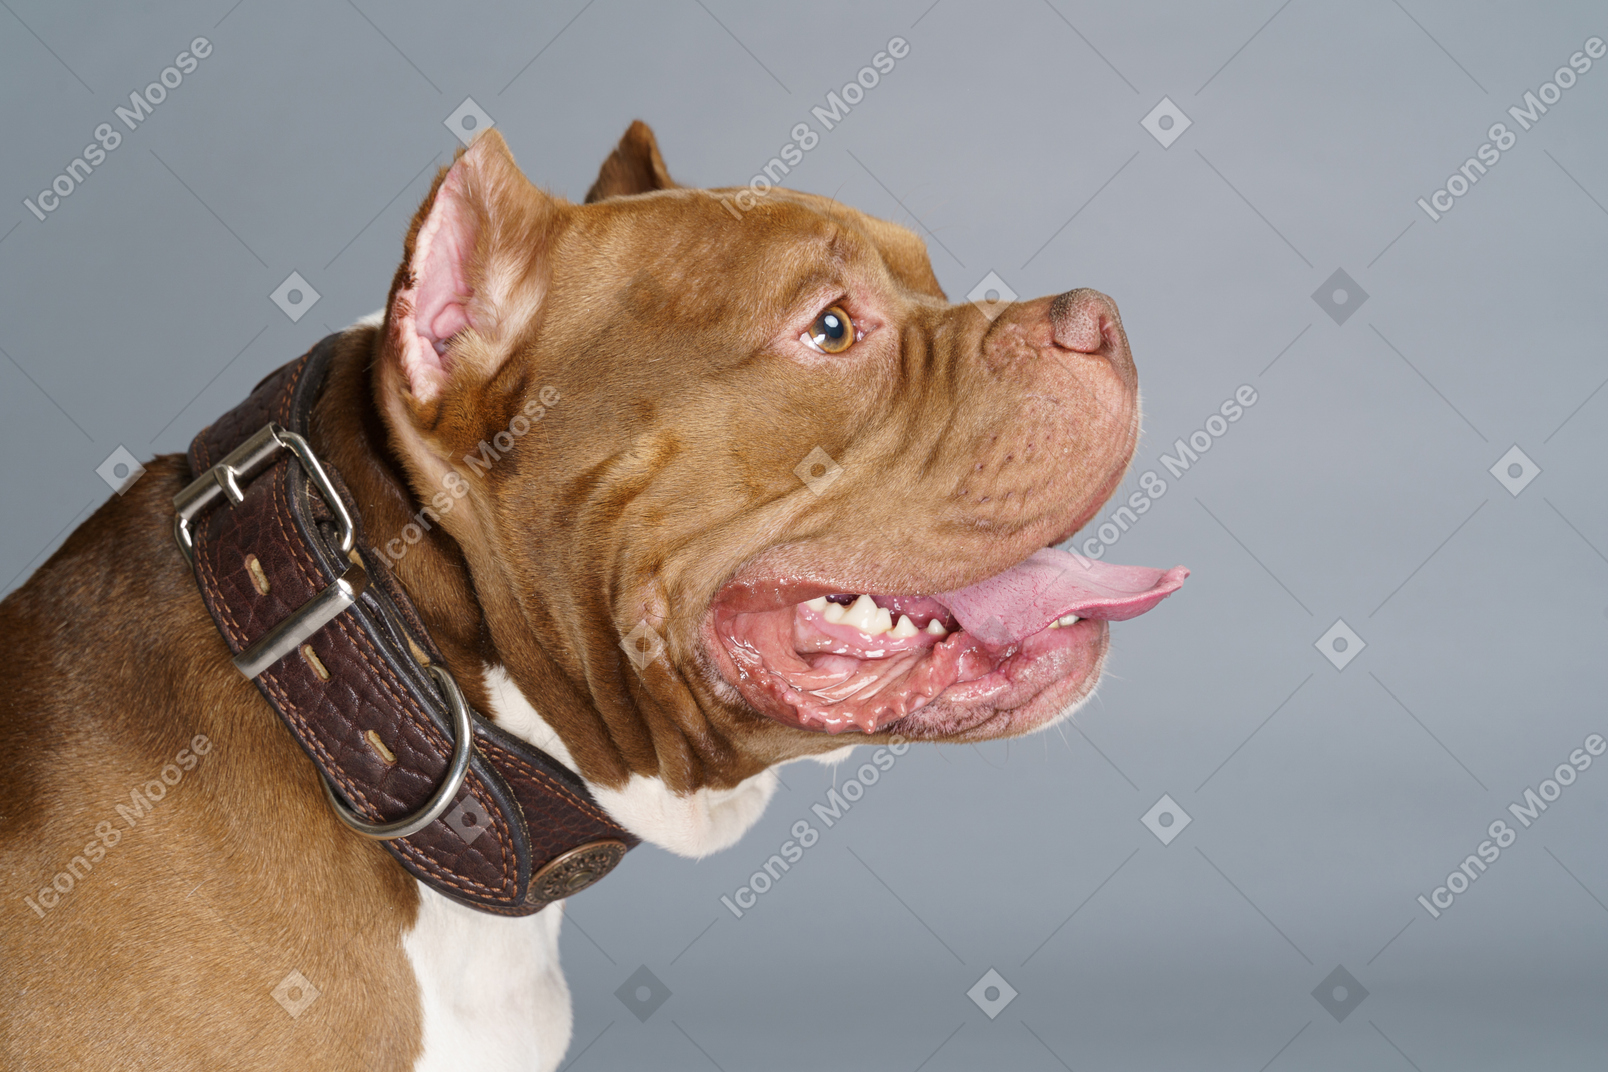 Side view of a brown bulldog wearing a dog collar